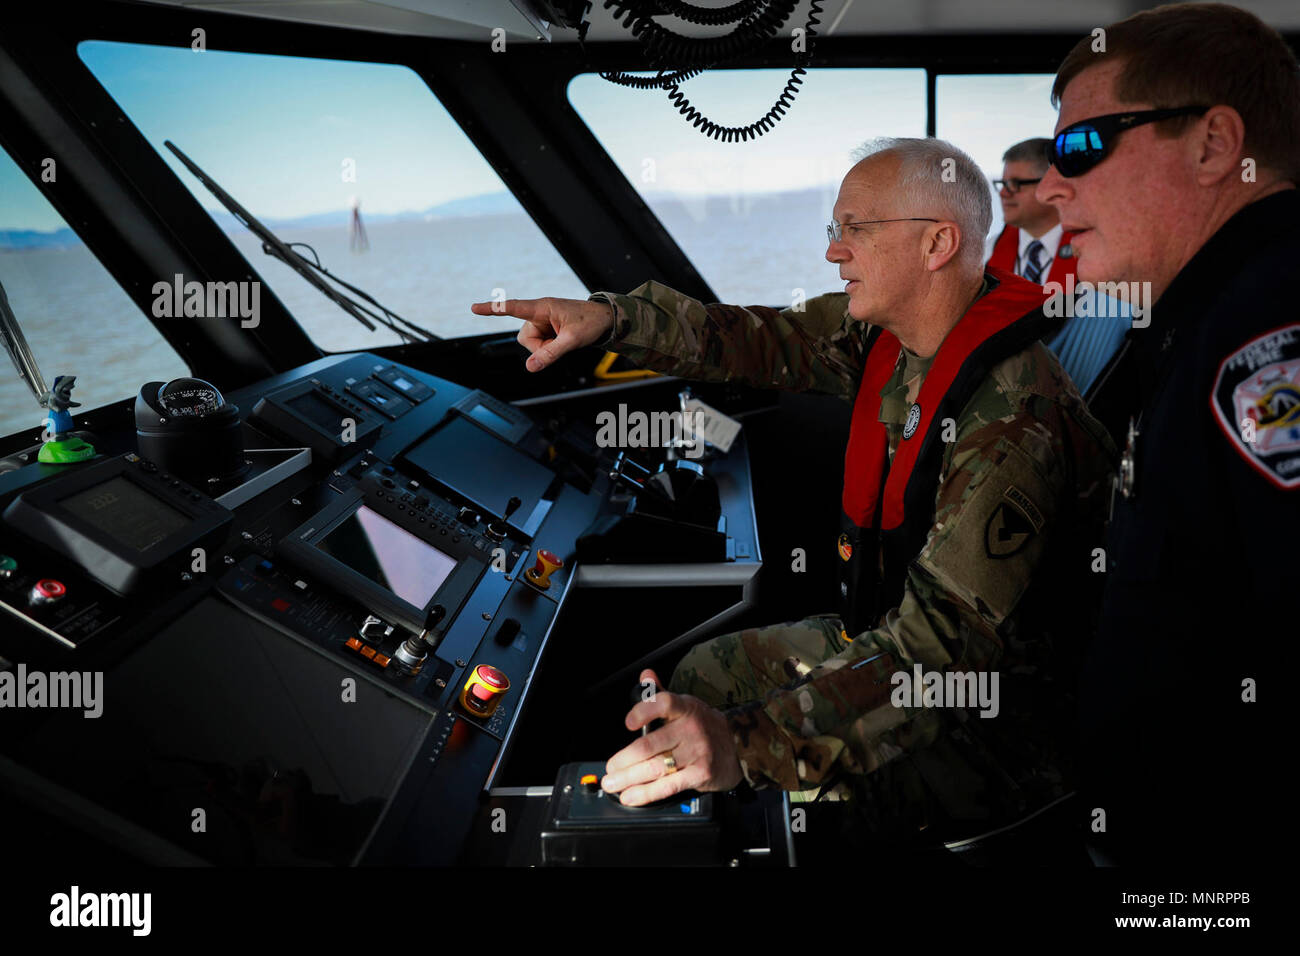 Maj. Gen. Allen M. Harrell drives one of two U.S. Army fire boats during Operation Trans Mariner 18 West at Military Ocean Terminal Concord, California, Mar. 6, 2018. Trans Mariner 18 West is a real-world strategic mission utilizing U.S. Army Reserve, National Guard and Active component Soldiers to conduct Port Operations allowing Army materiel and munitions containers for travel onward. Stock Photo